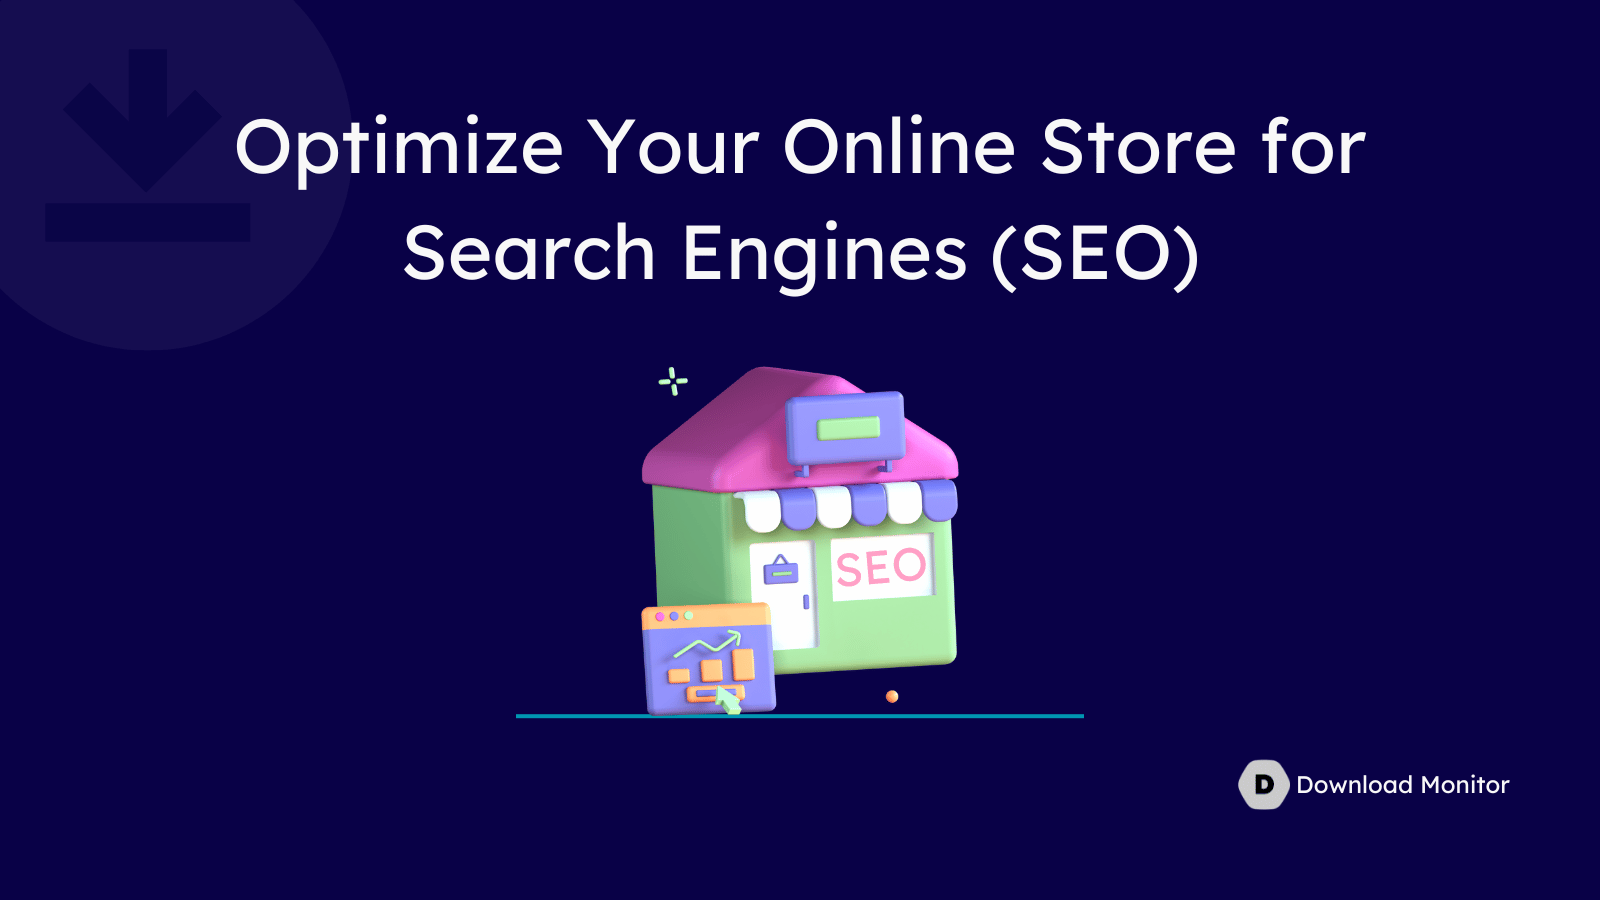 Optimize Your Online Store for Search Engines (SEO)